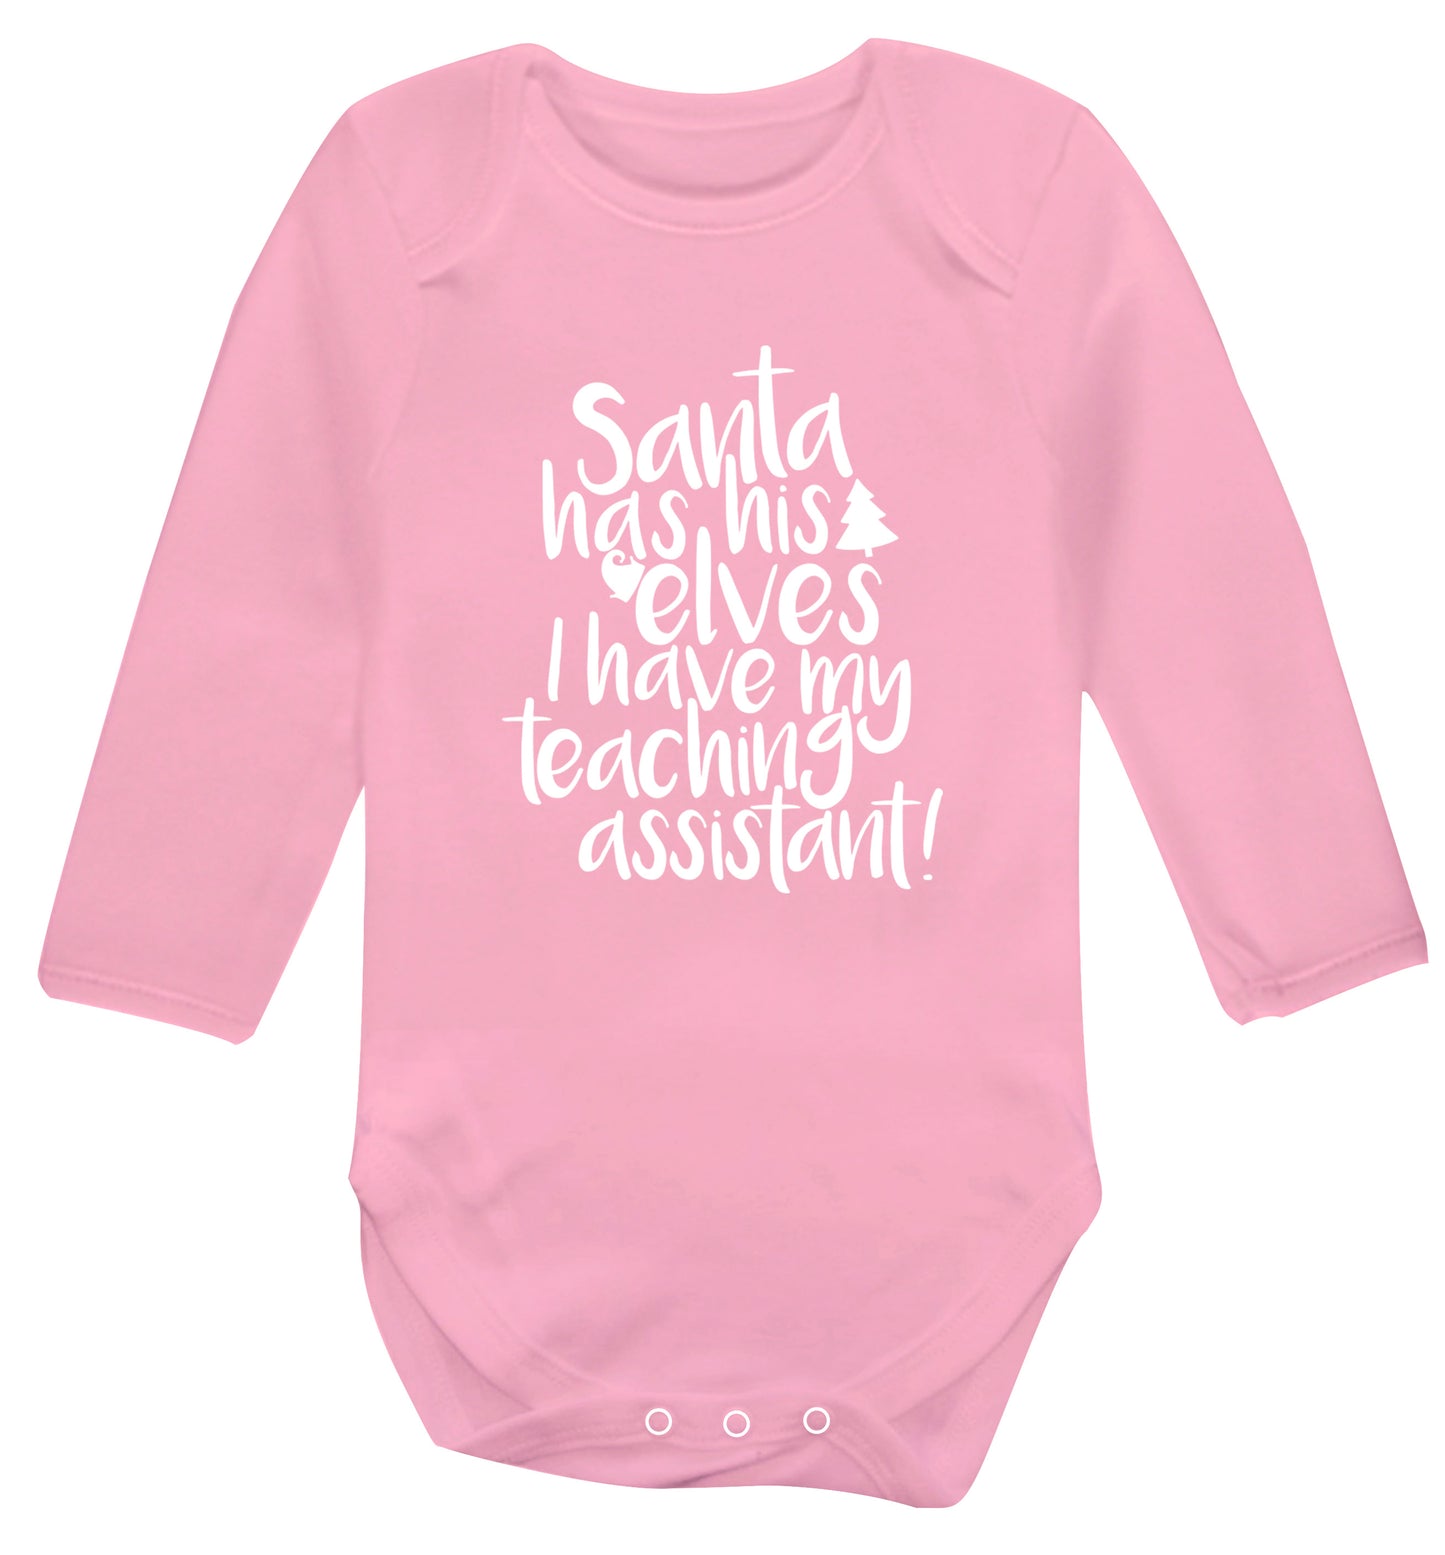 Santa has his elves I have my teaching assistant Baby Vest long sleeved pale pink 6-12 months